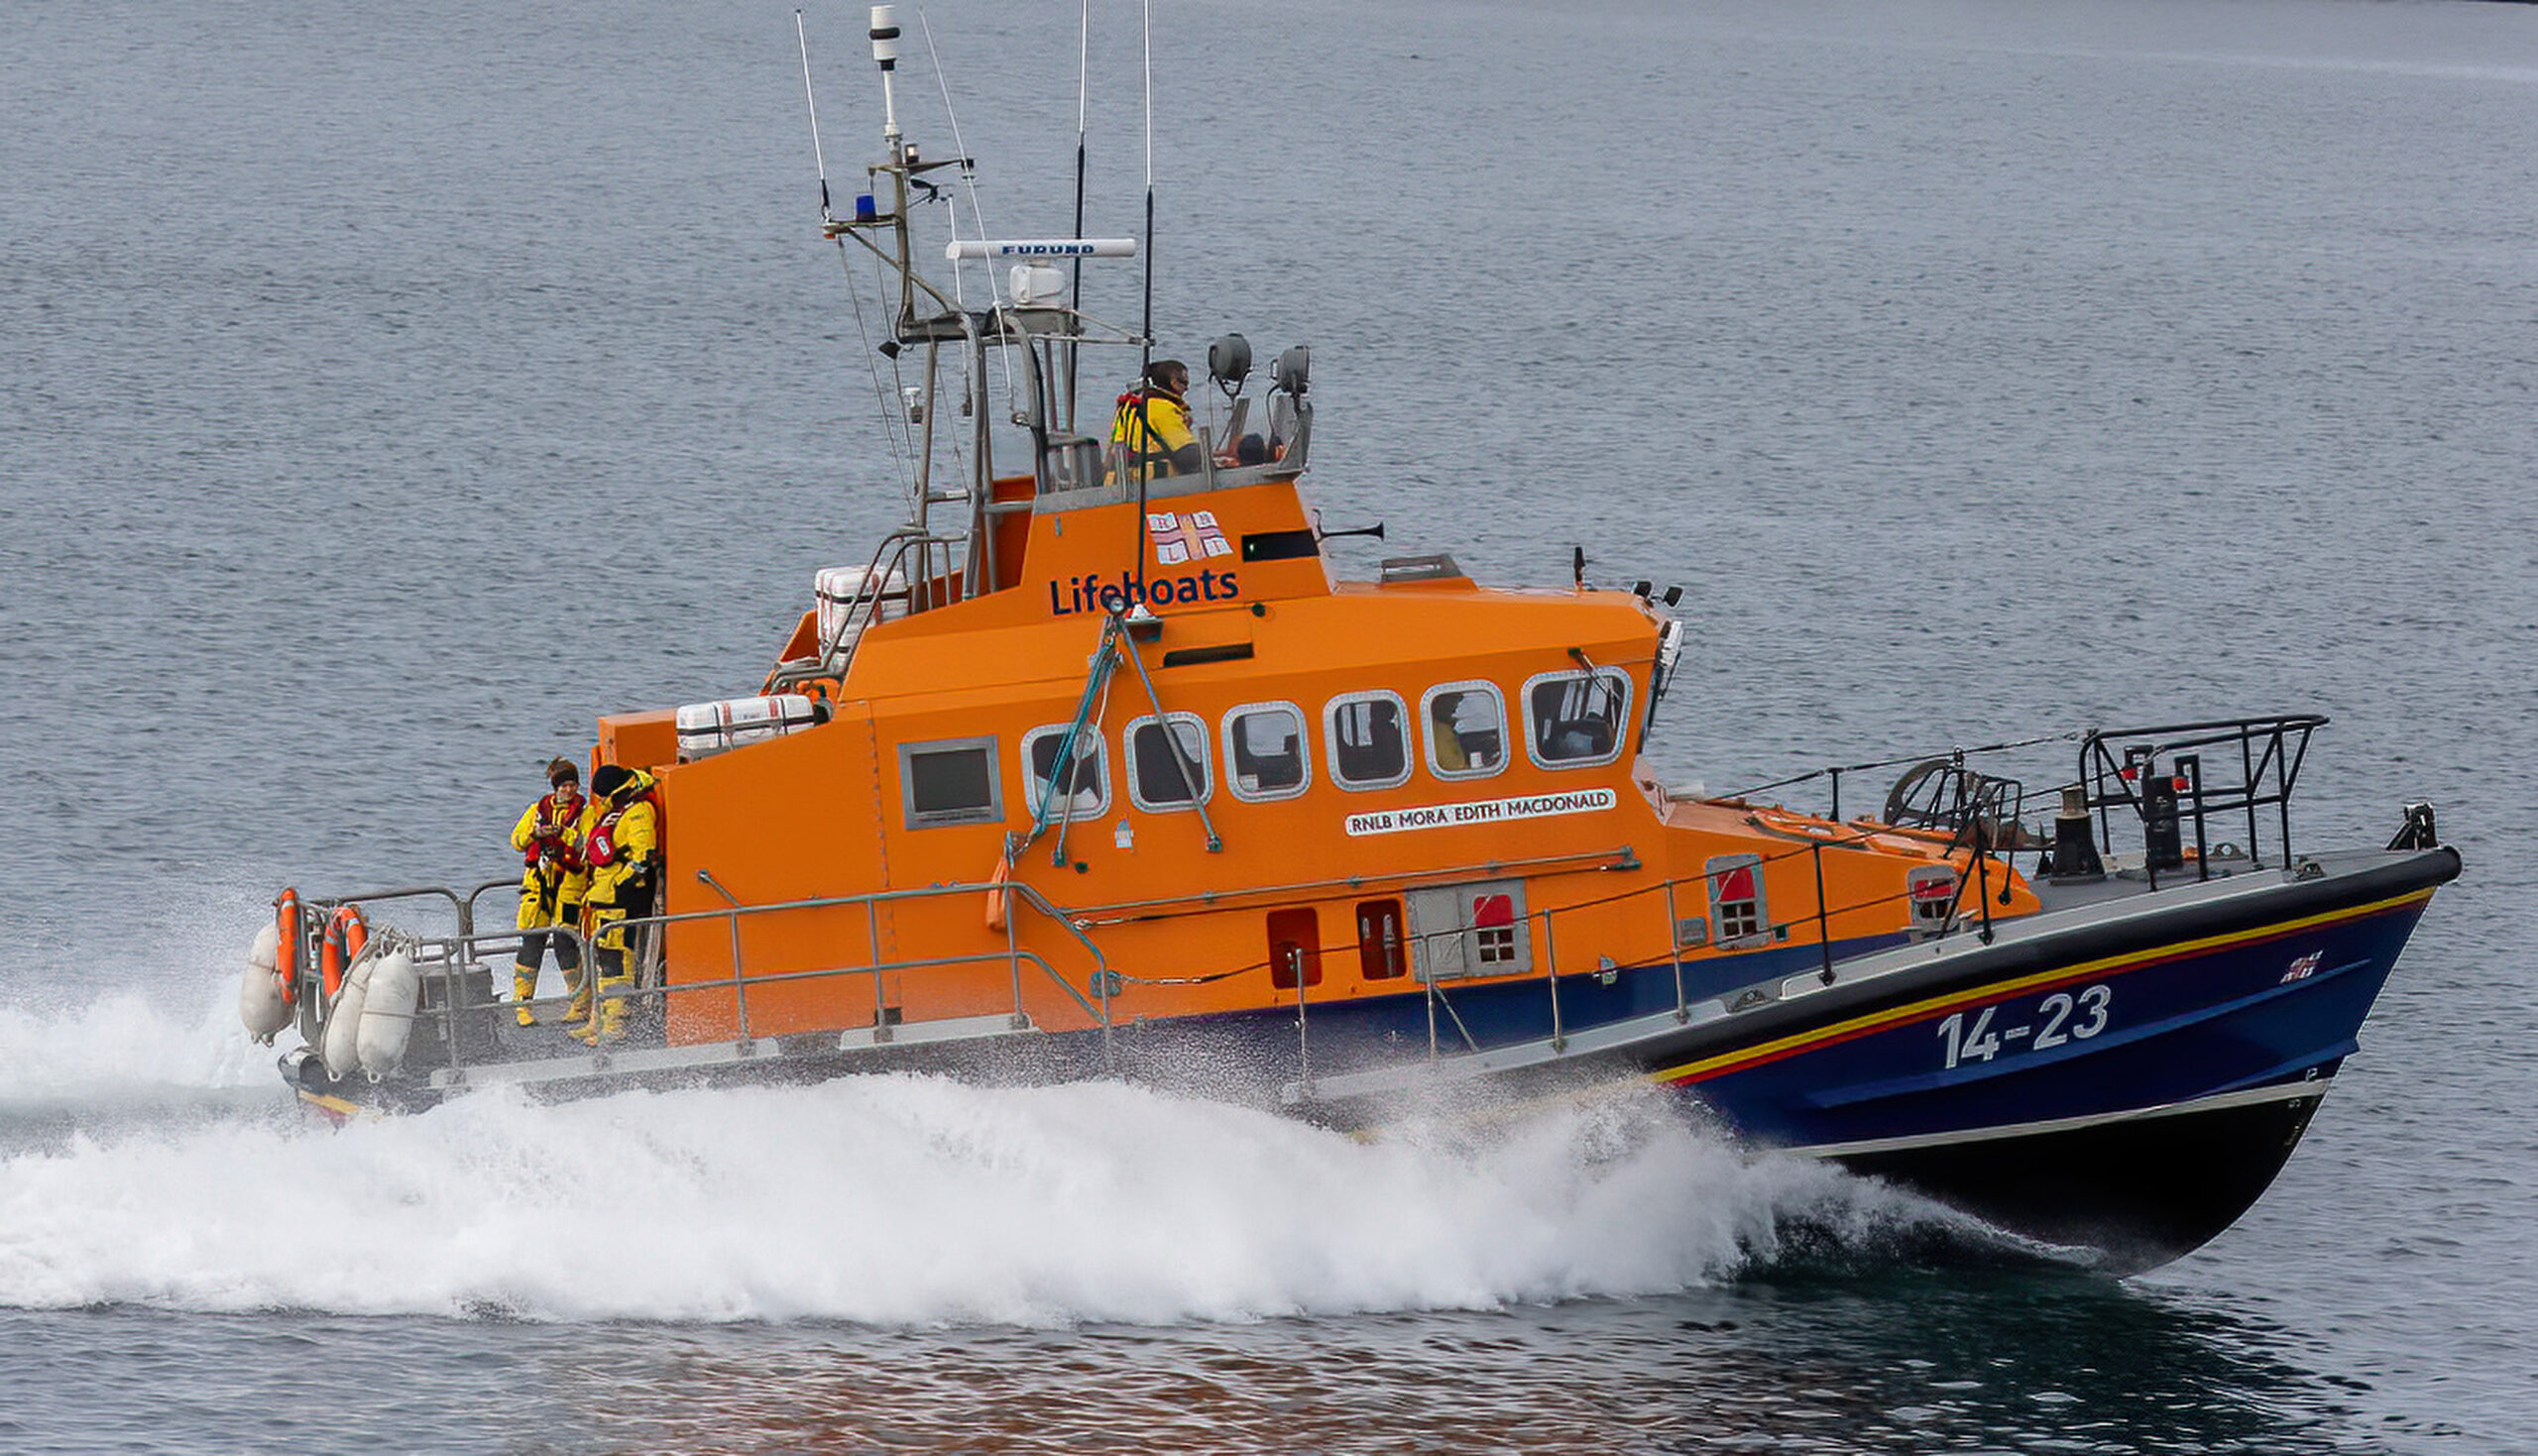 Ferry helps Oban RNLI rescue fishing boat - The Oban Times